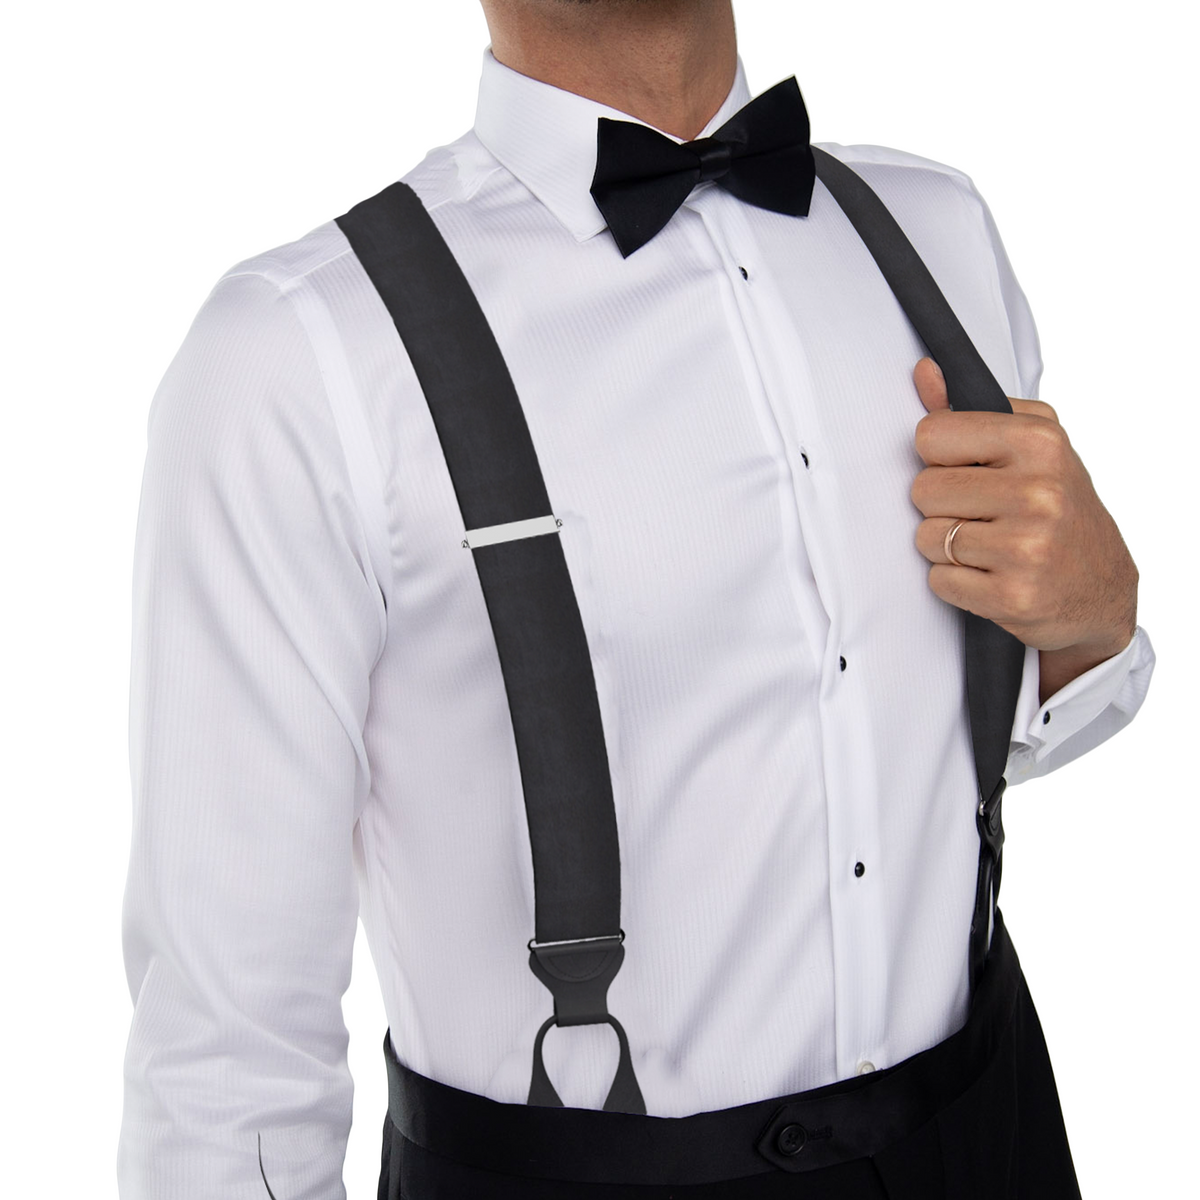 Black Silk Braces with White Piping –